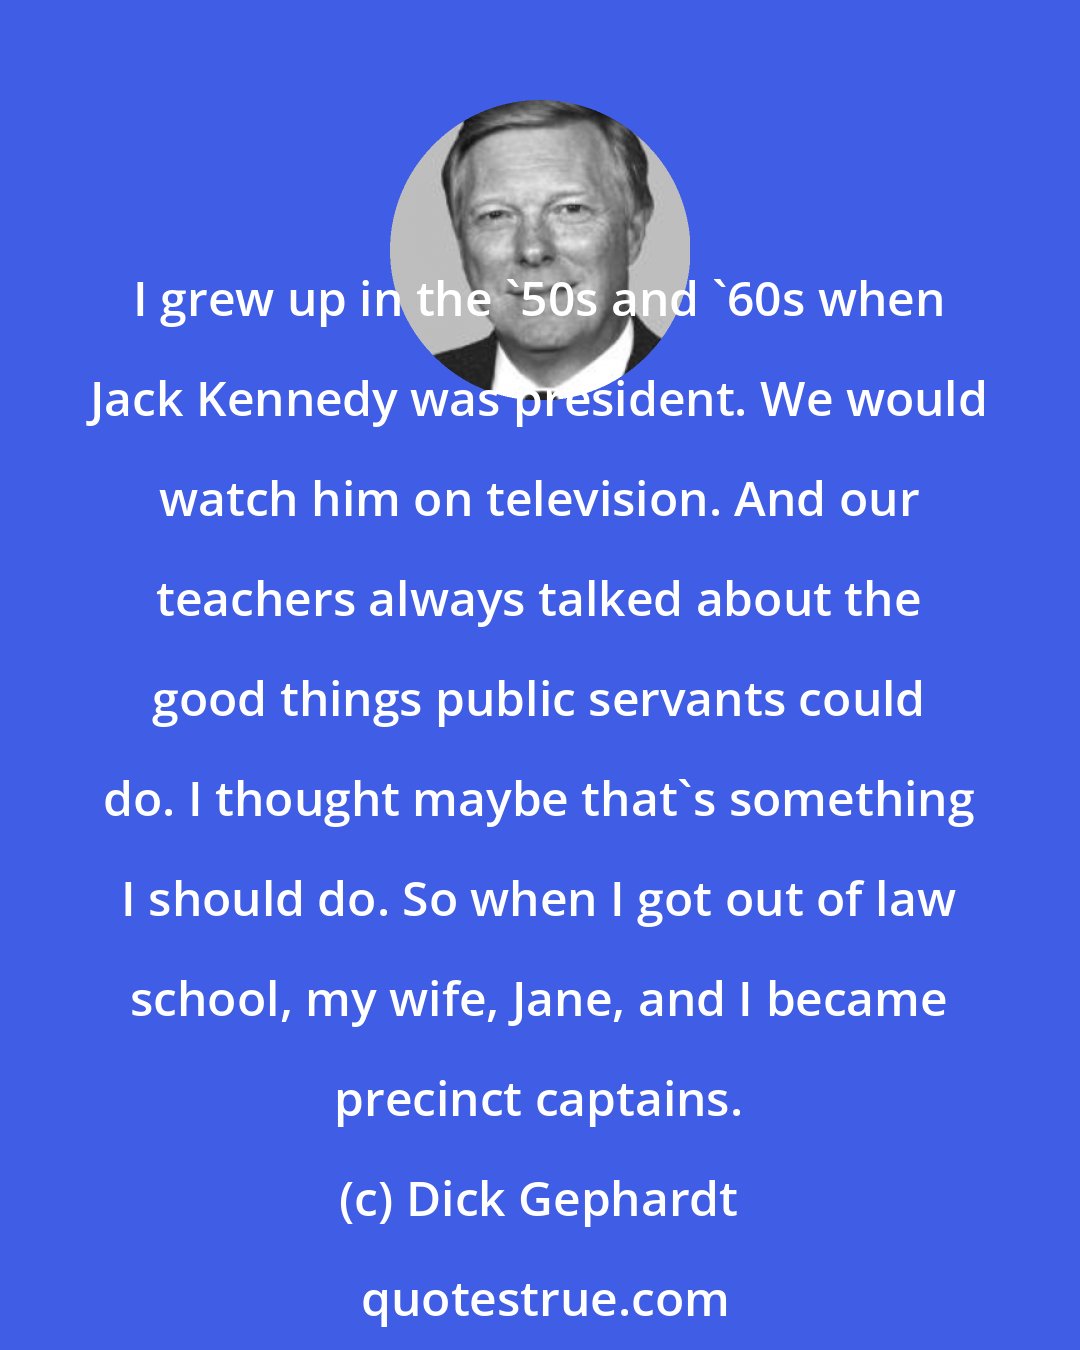 Dick Gephardt: I grew up in the '50s and '60s when Jack Kennedy was president. We would watch him on television. And our teachers always talked about the good things public servants could do. I thought maybe that's something I should do. So when I got out of law school, my wife, Jane, and I became precinct captains.